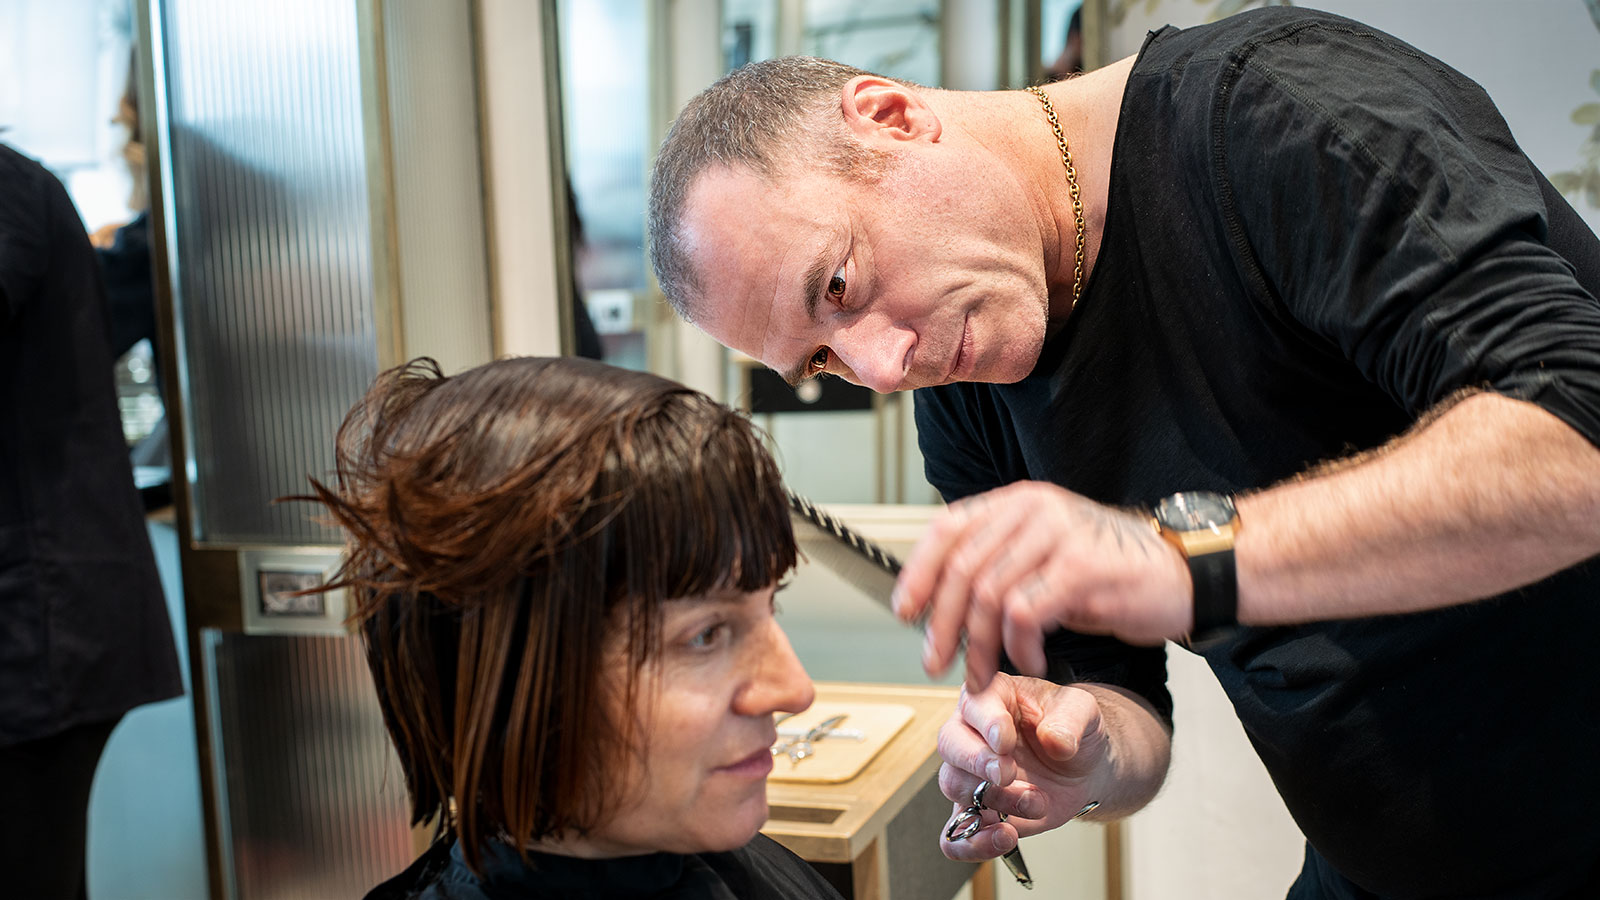 Mauro Basso, one of the best Italian hairdressers, while cutting a client's hair